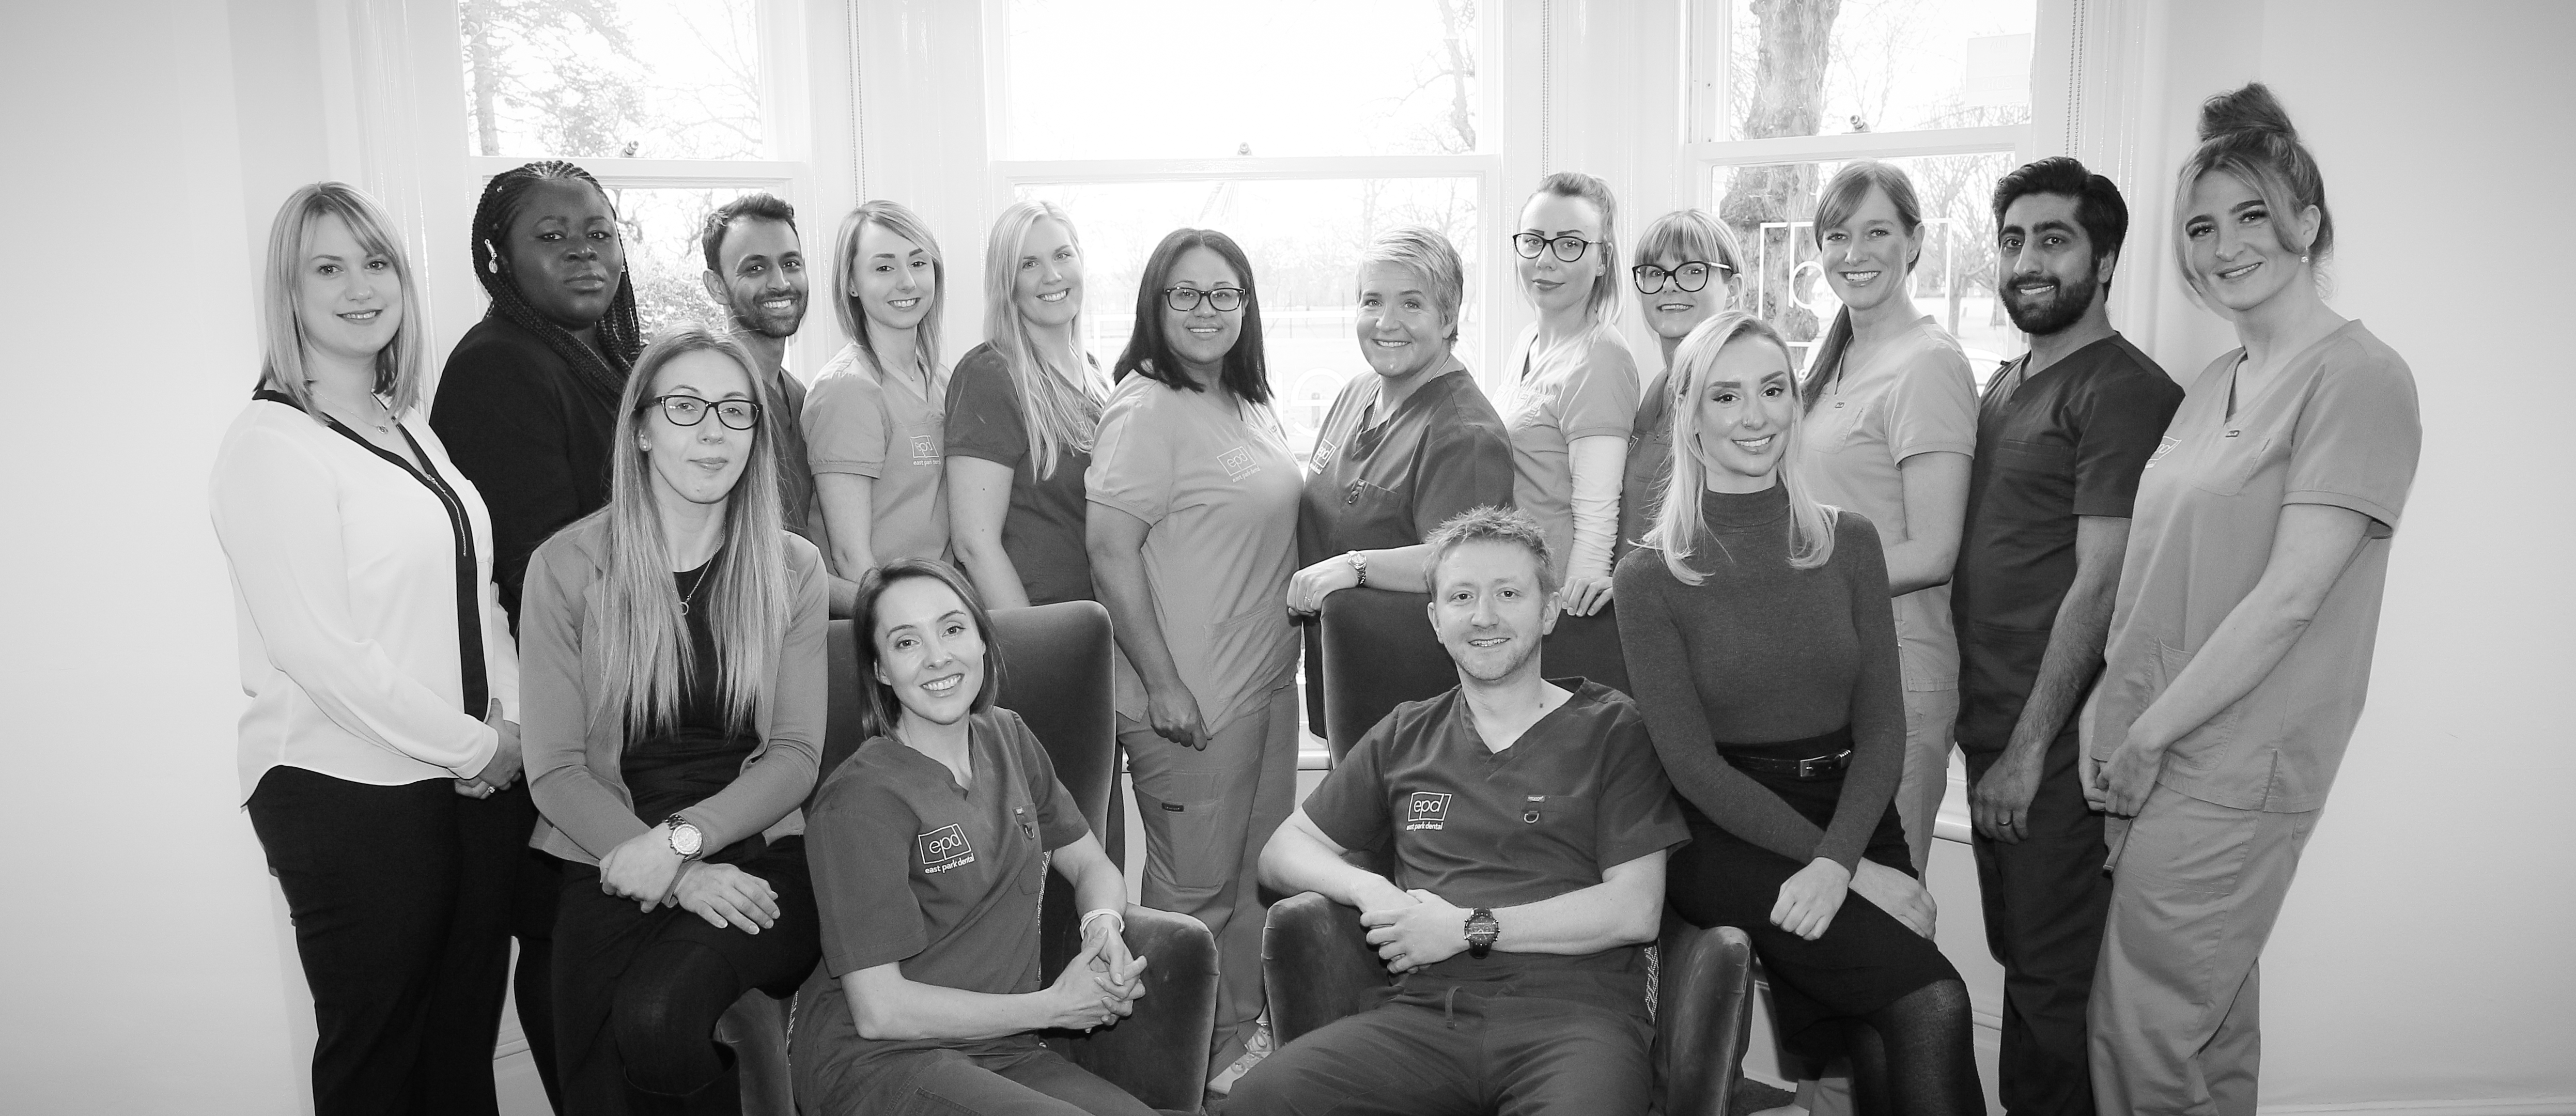 Welcome to East Park Dental